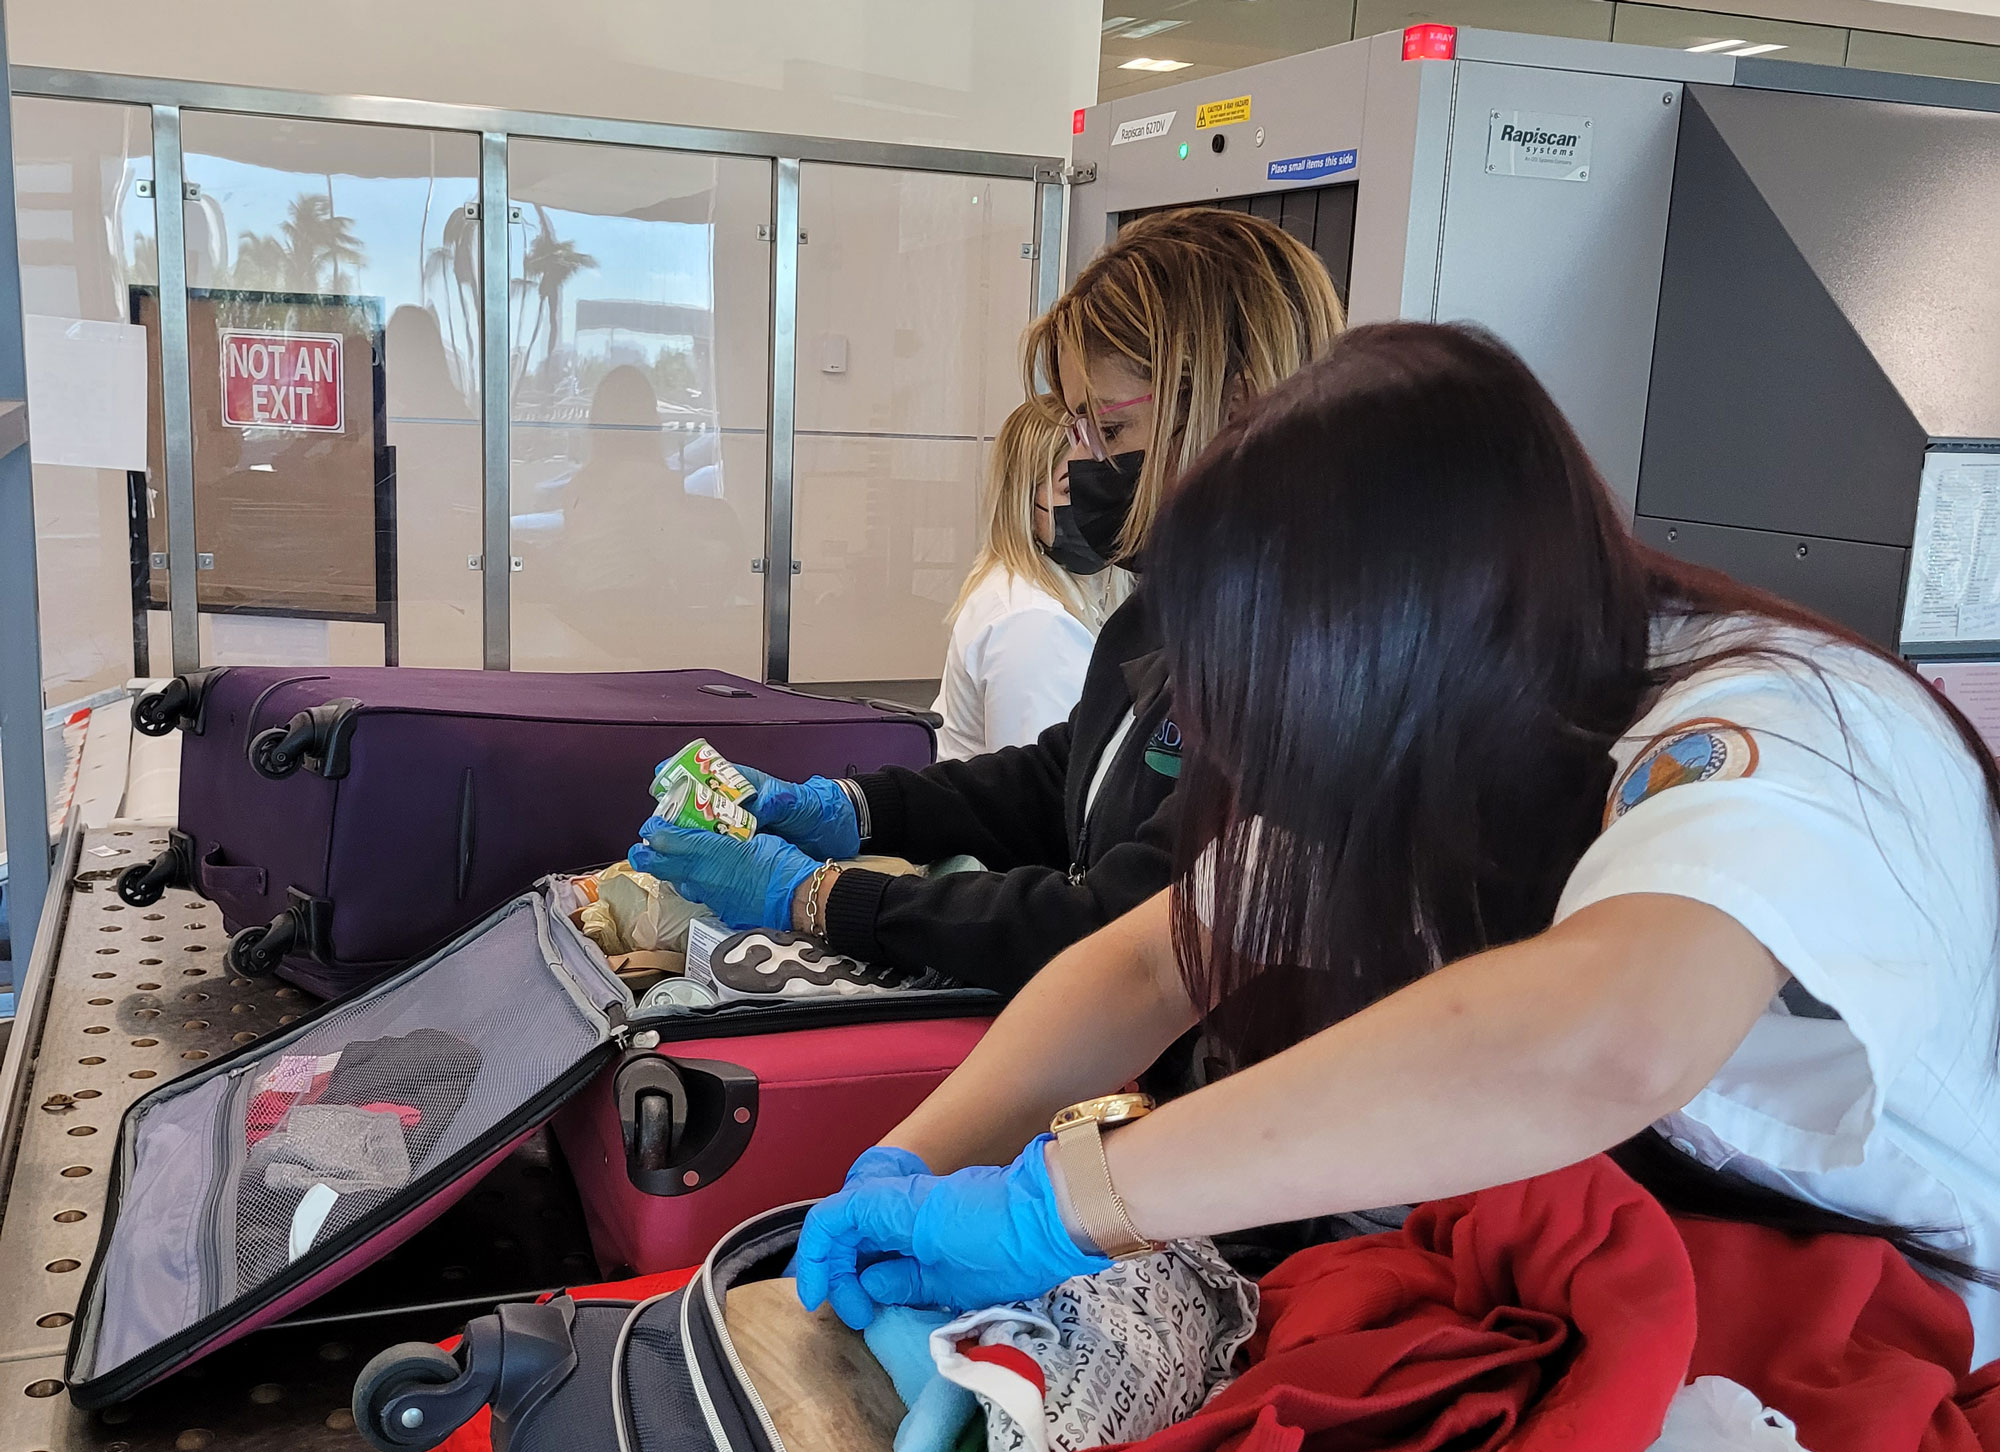 APHIS Plant Protection and Quarantine Predeparture employees in Puerto Rico (Pictured from L to R) Technician Dimarie Rivera and Aid Maria Benitez doing passenger baggage inspections